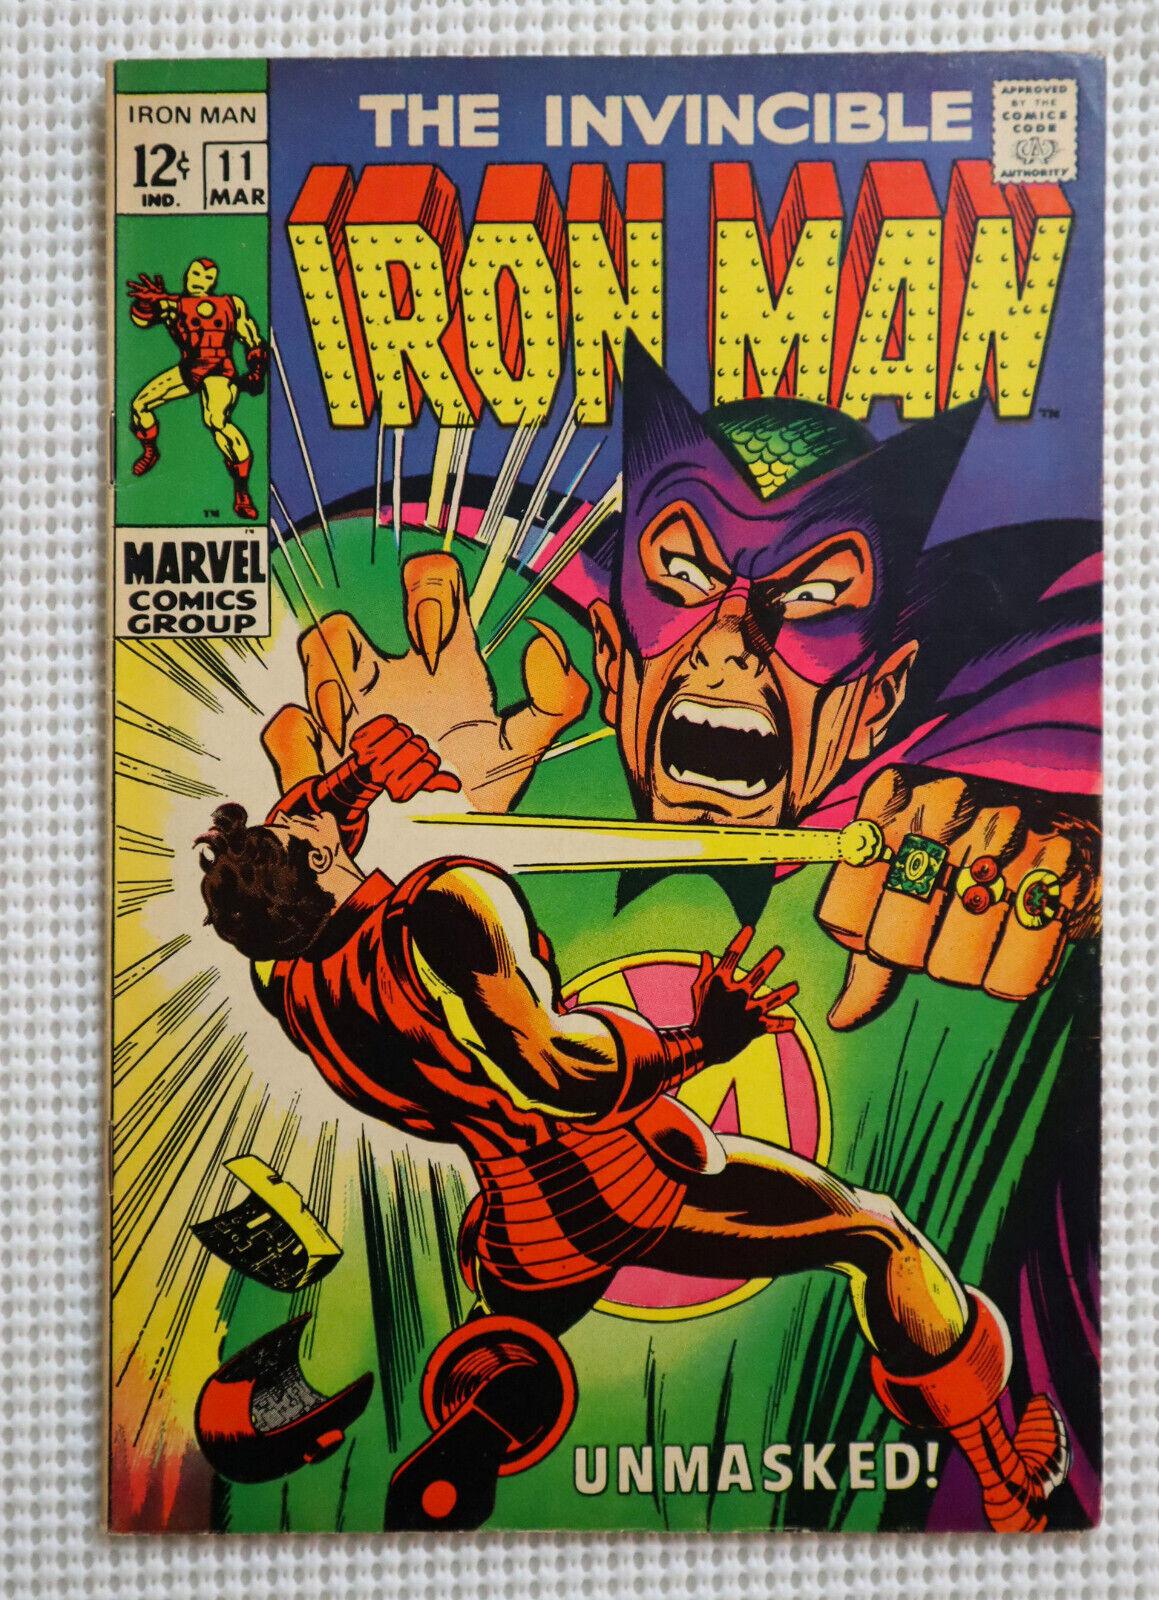 MID/HIGH GRADE 1969 Invincible Iron Man 11 by Marvel Comics:Silver Age 12¢ cover